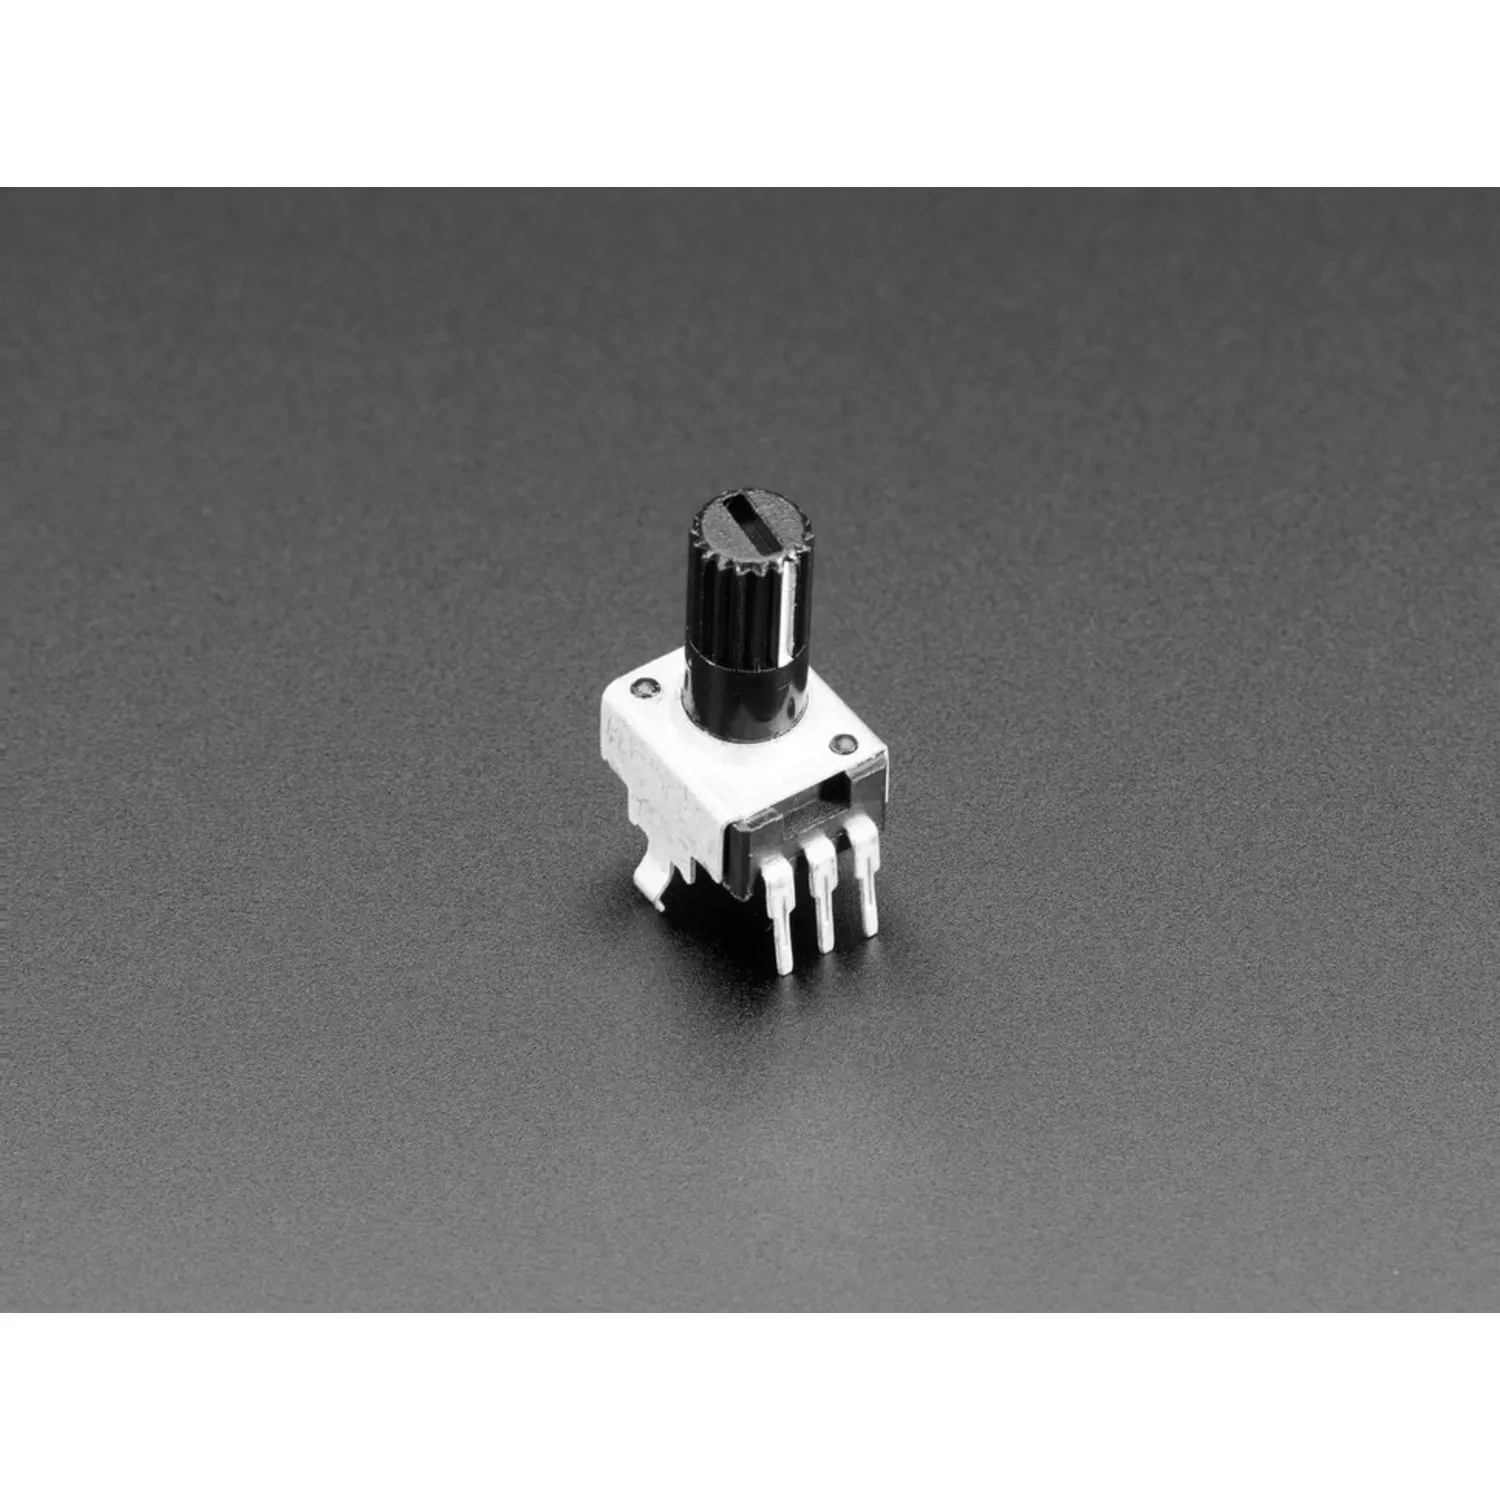 Photo of Potentiometer with Built In Knob - 10K ohm